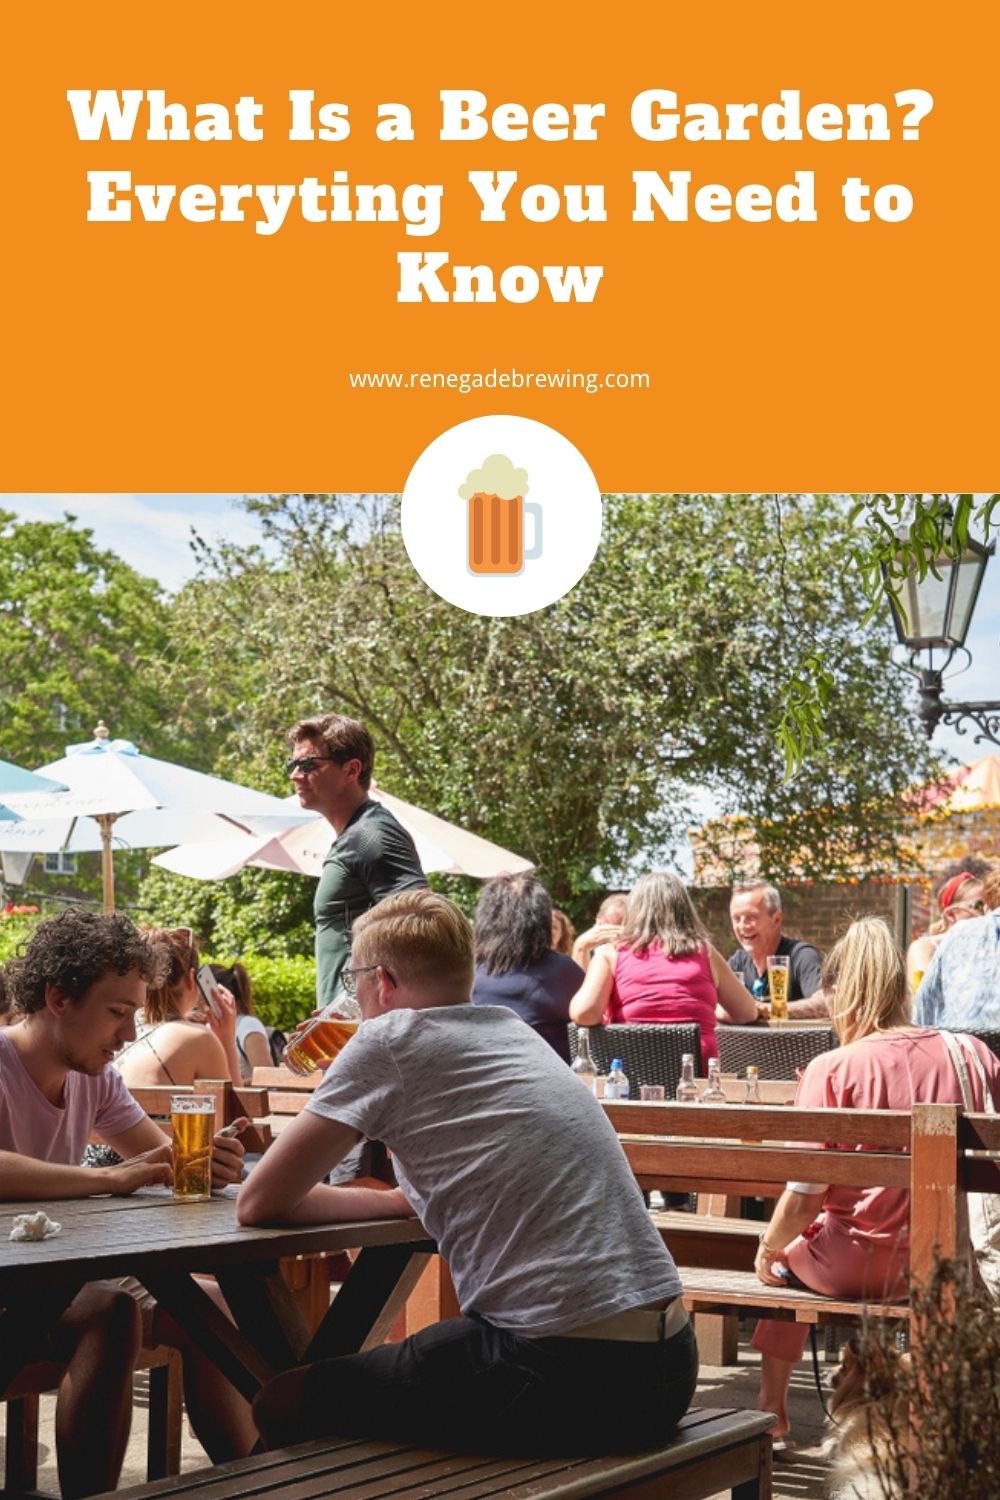 7 Easy Ways To Make The Guide to Beer Gardens Faster